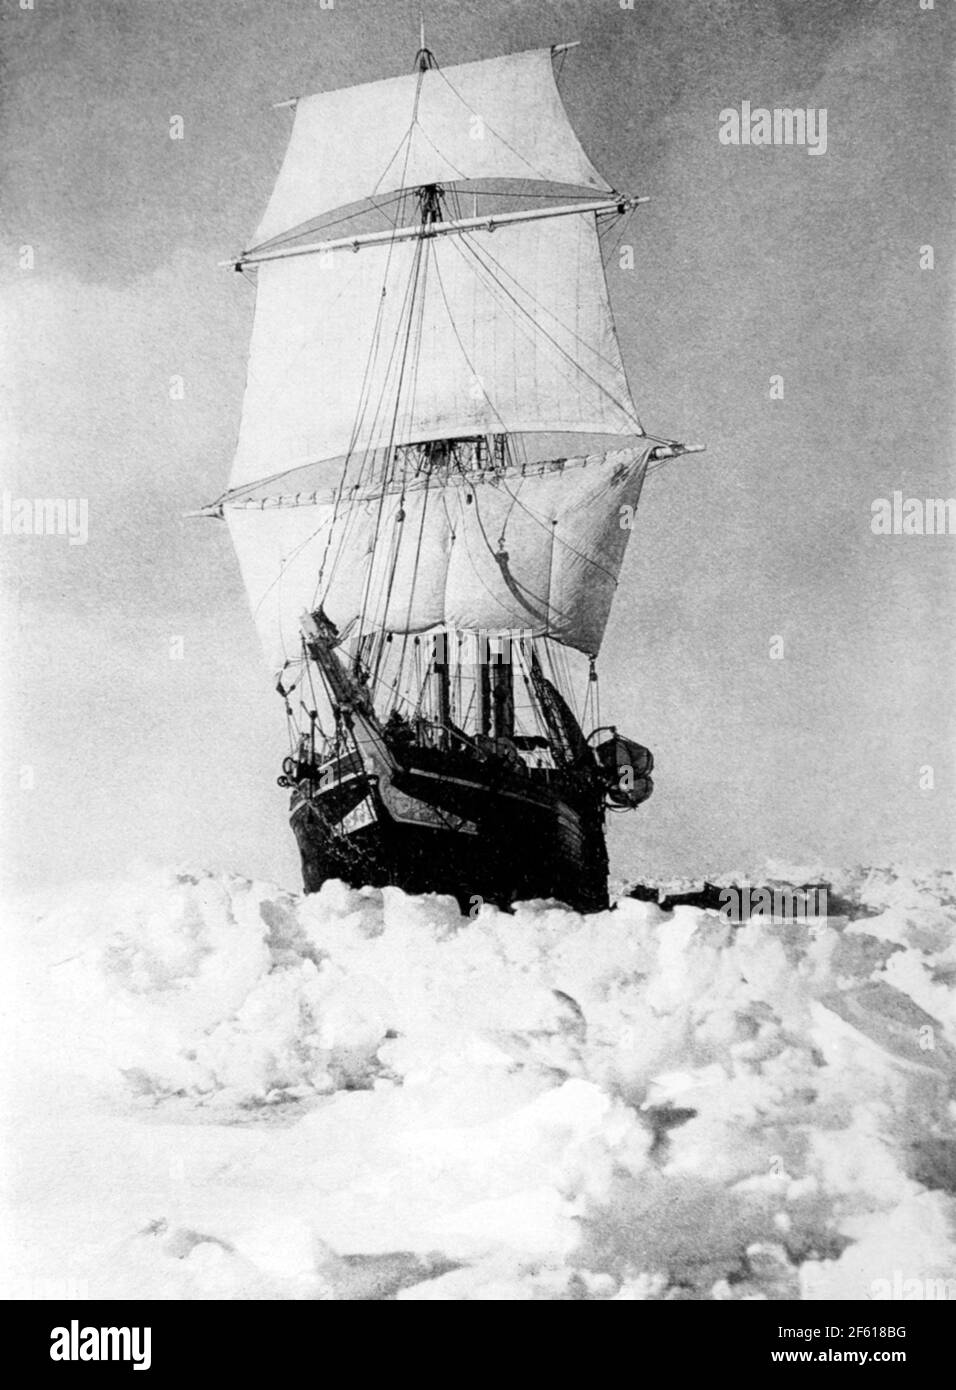 Imperial Trans-Antarctic Expedition, Endurance, 1915 Stock Photo